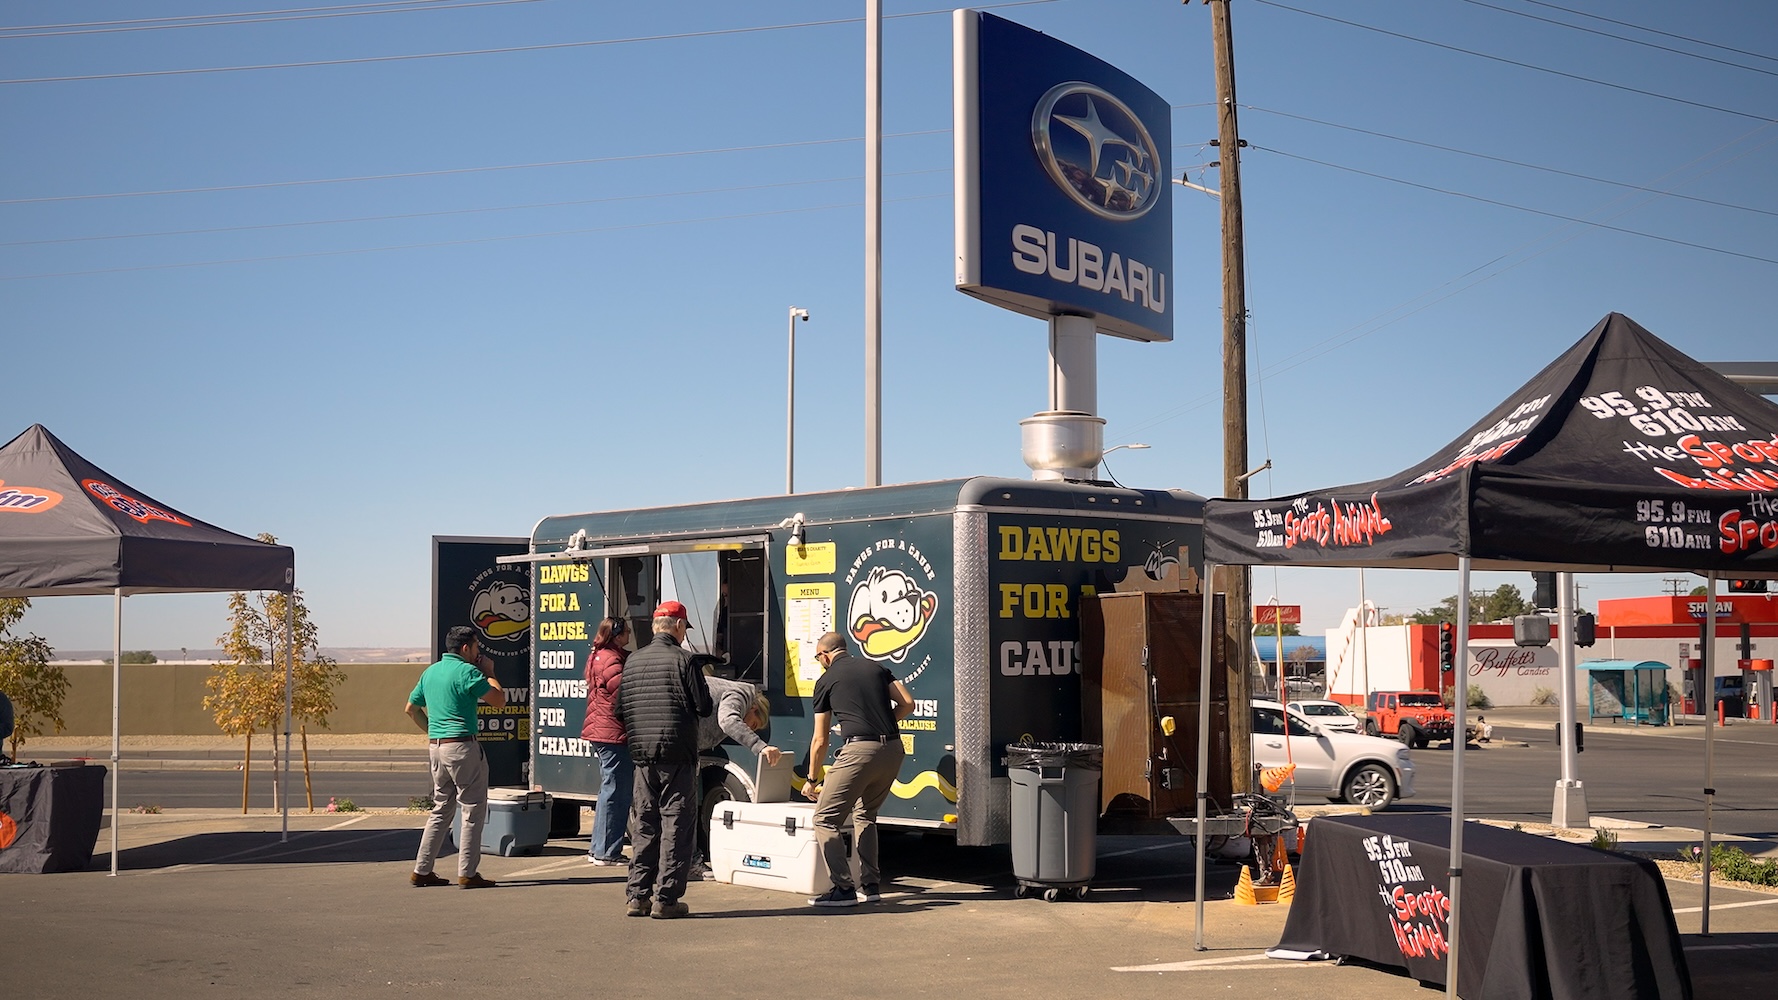 Dawgs for a Cause food truck at Subaru pet adoption event